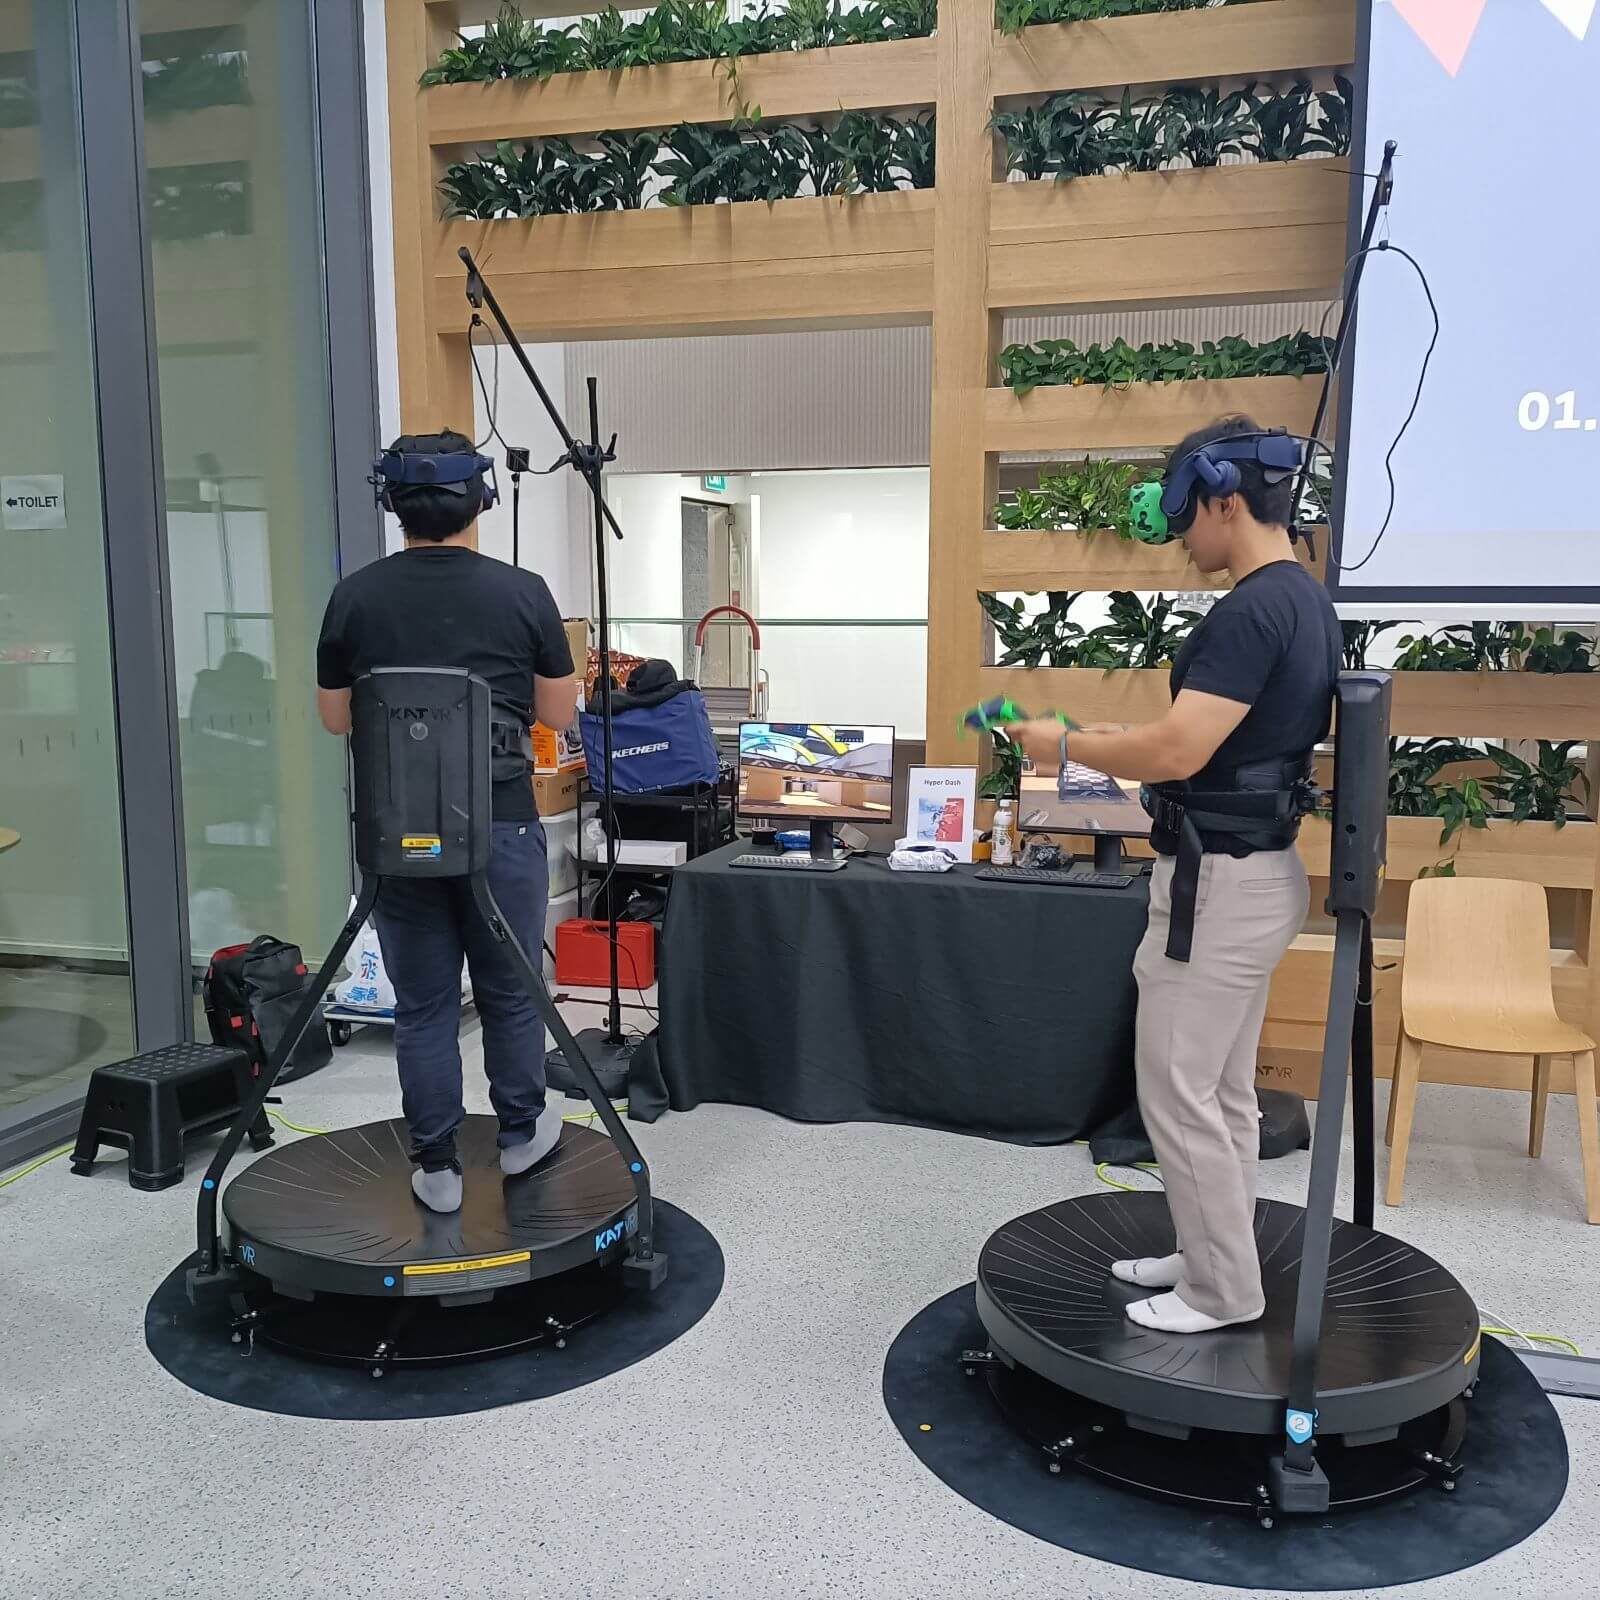 Virtual Reality Arcade And Event Company At Bugis For Sale